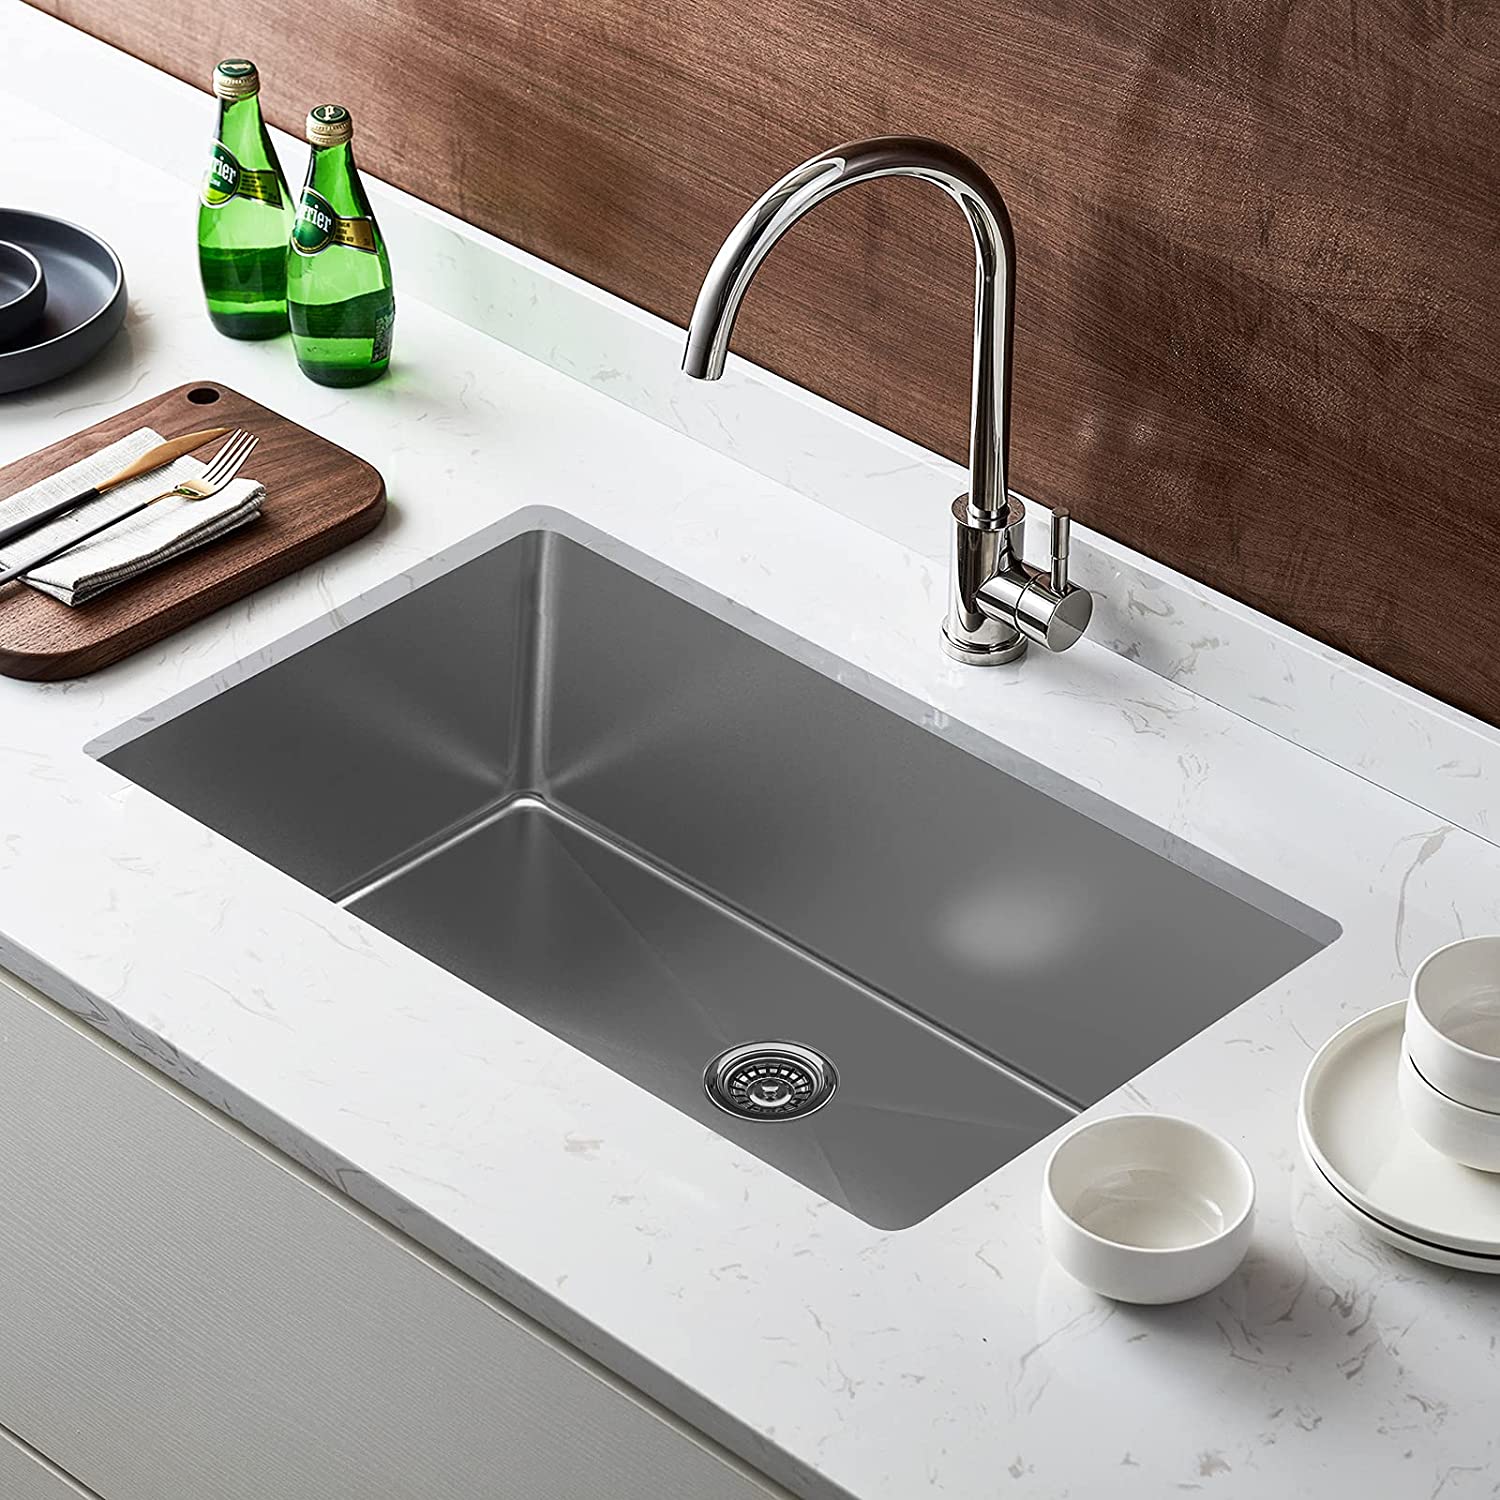 Infinity plus bathrooms offer a big range of stainless steel sinks and granite kitchen sinks